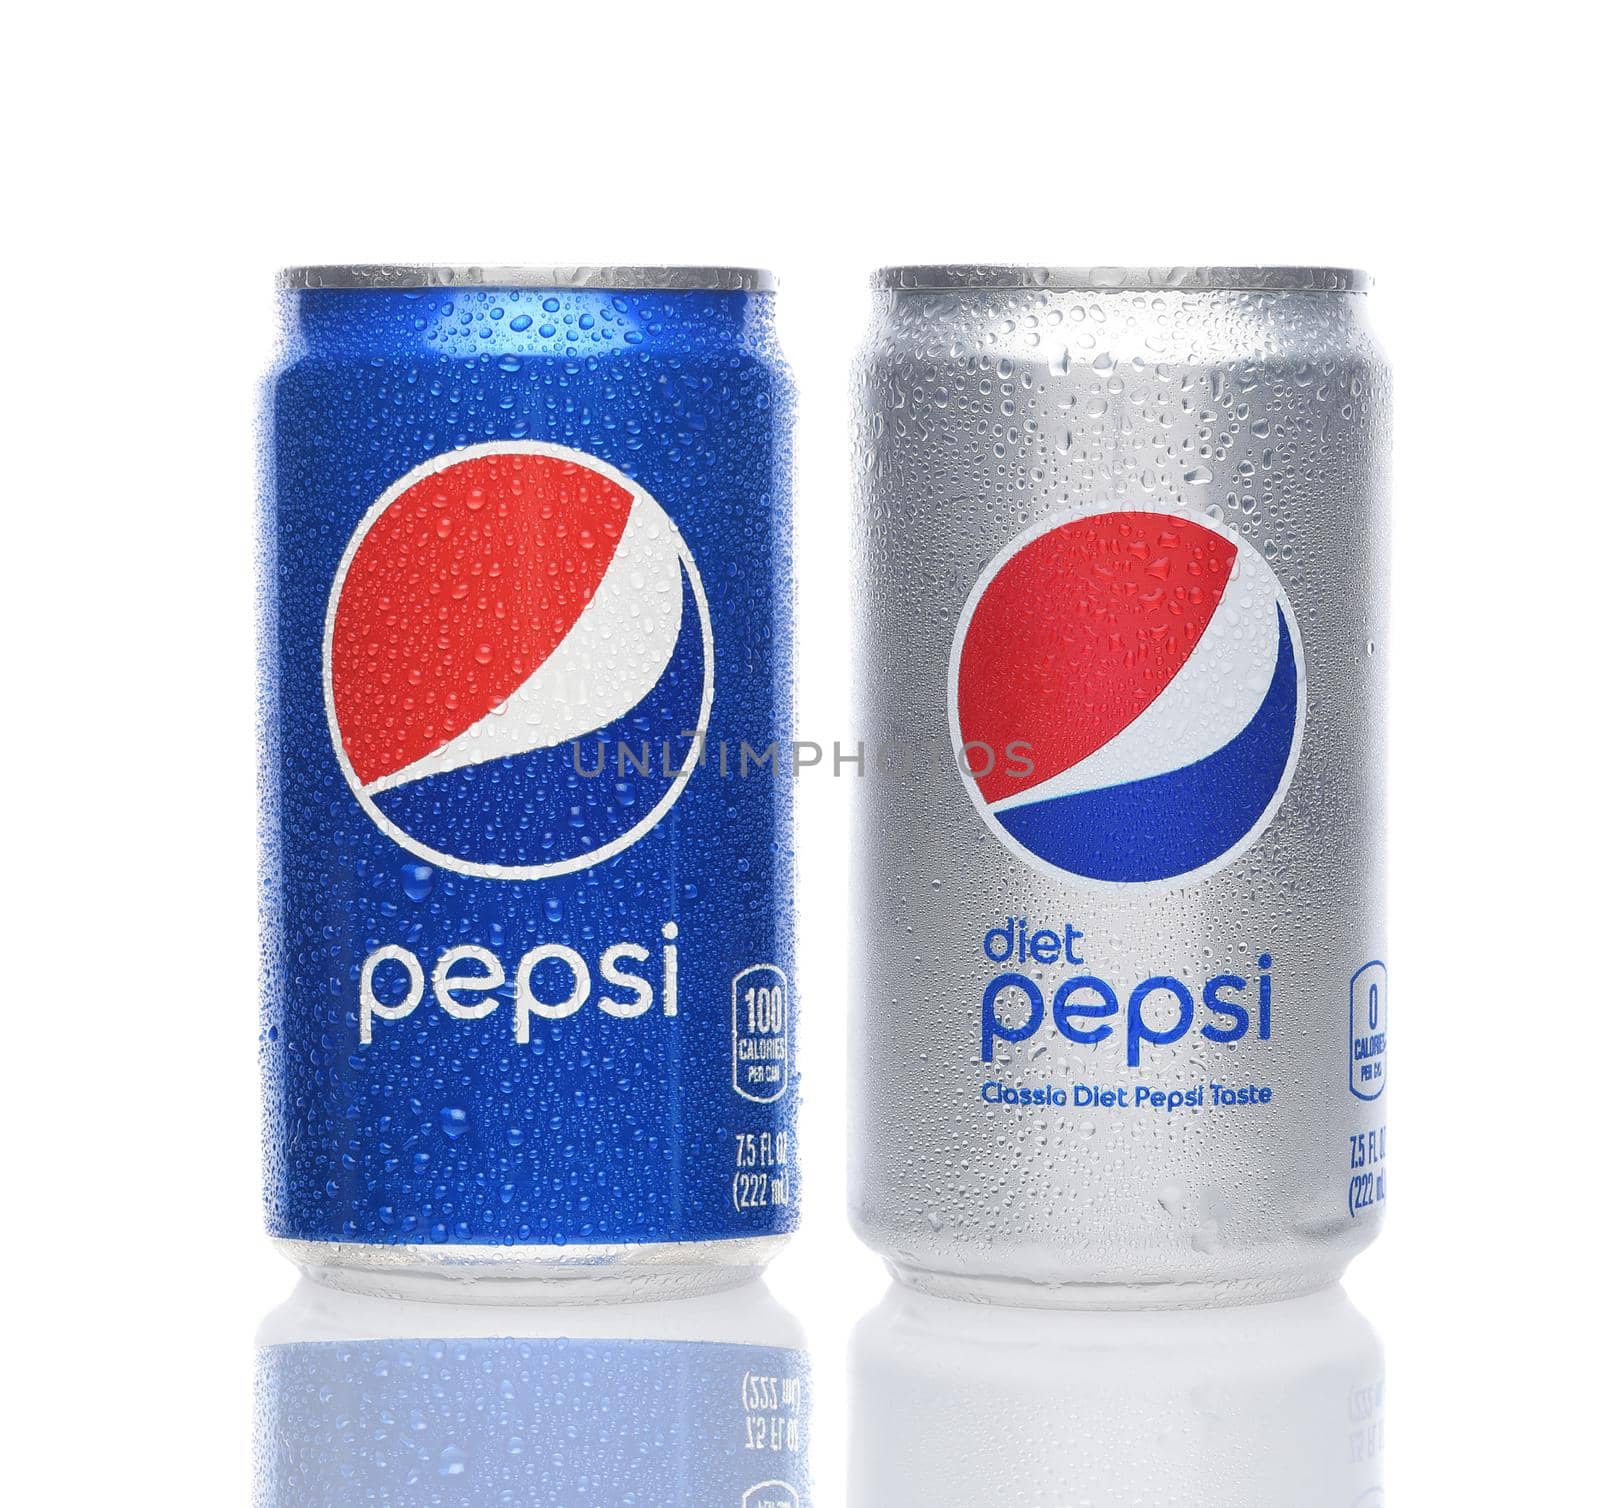 IRVINE, CALIFORNIA - 26 JUNE 2021: A 7.5 ounce can of Pepsi and Diet Pepsi on white with reflection.